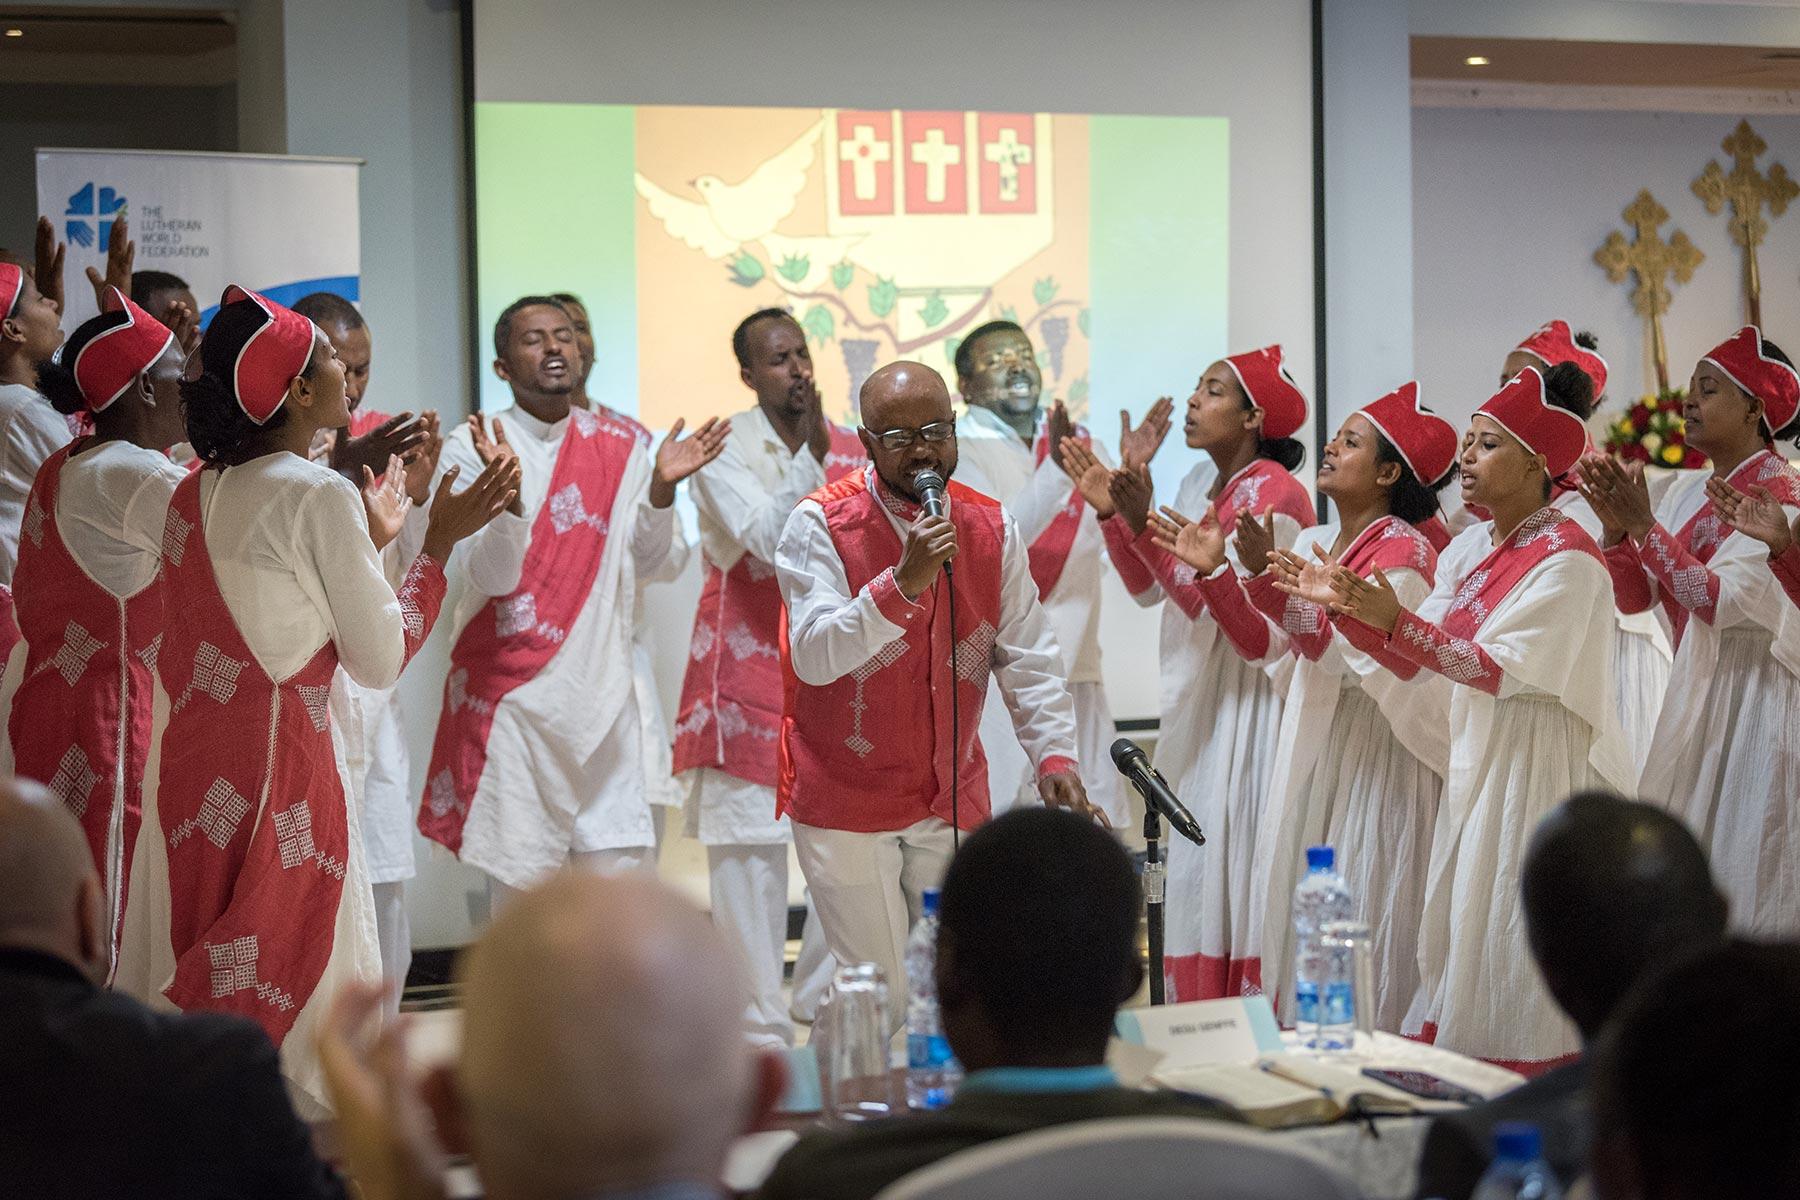 A vibrant performance by the Yetsedik Tsehay choir of the Ethiopian Evangelical Church Mekane Yesus set the stage, as the consultation âWe believe in the Holy Spirit: Global Perspectives on Lutheran Identities'Â  opened. Photo: LWF/Albin Hillert